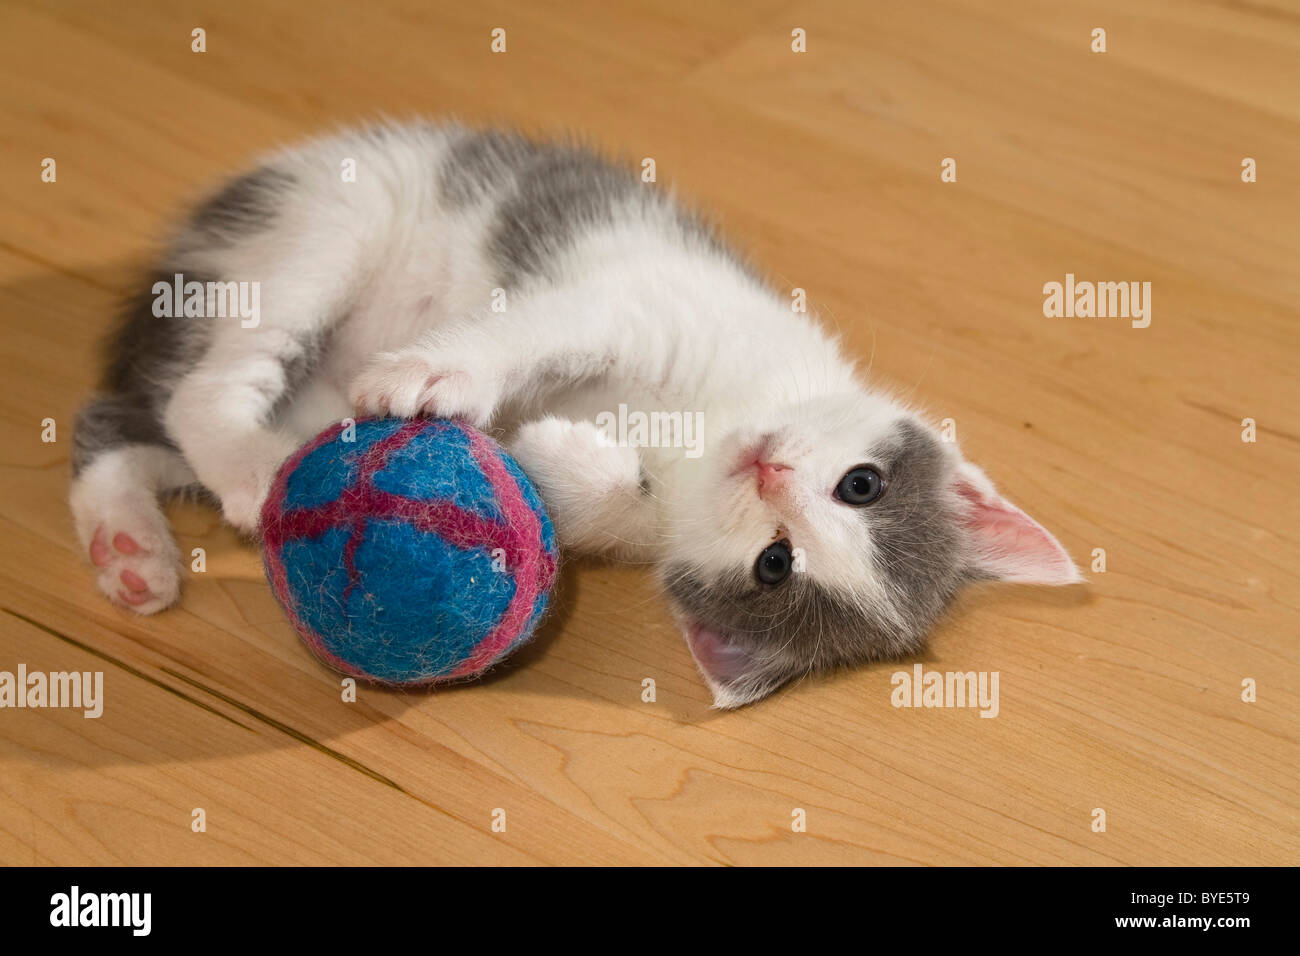 Kitten playing with ball Stock Photo